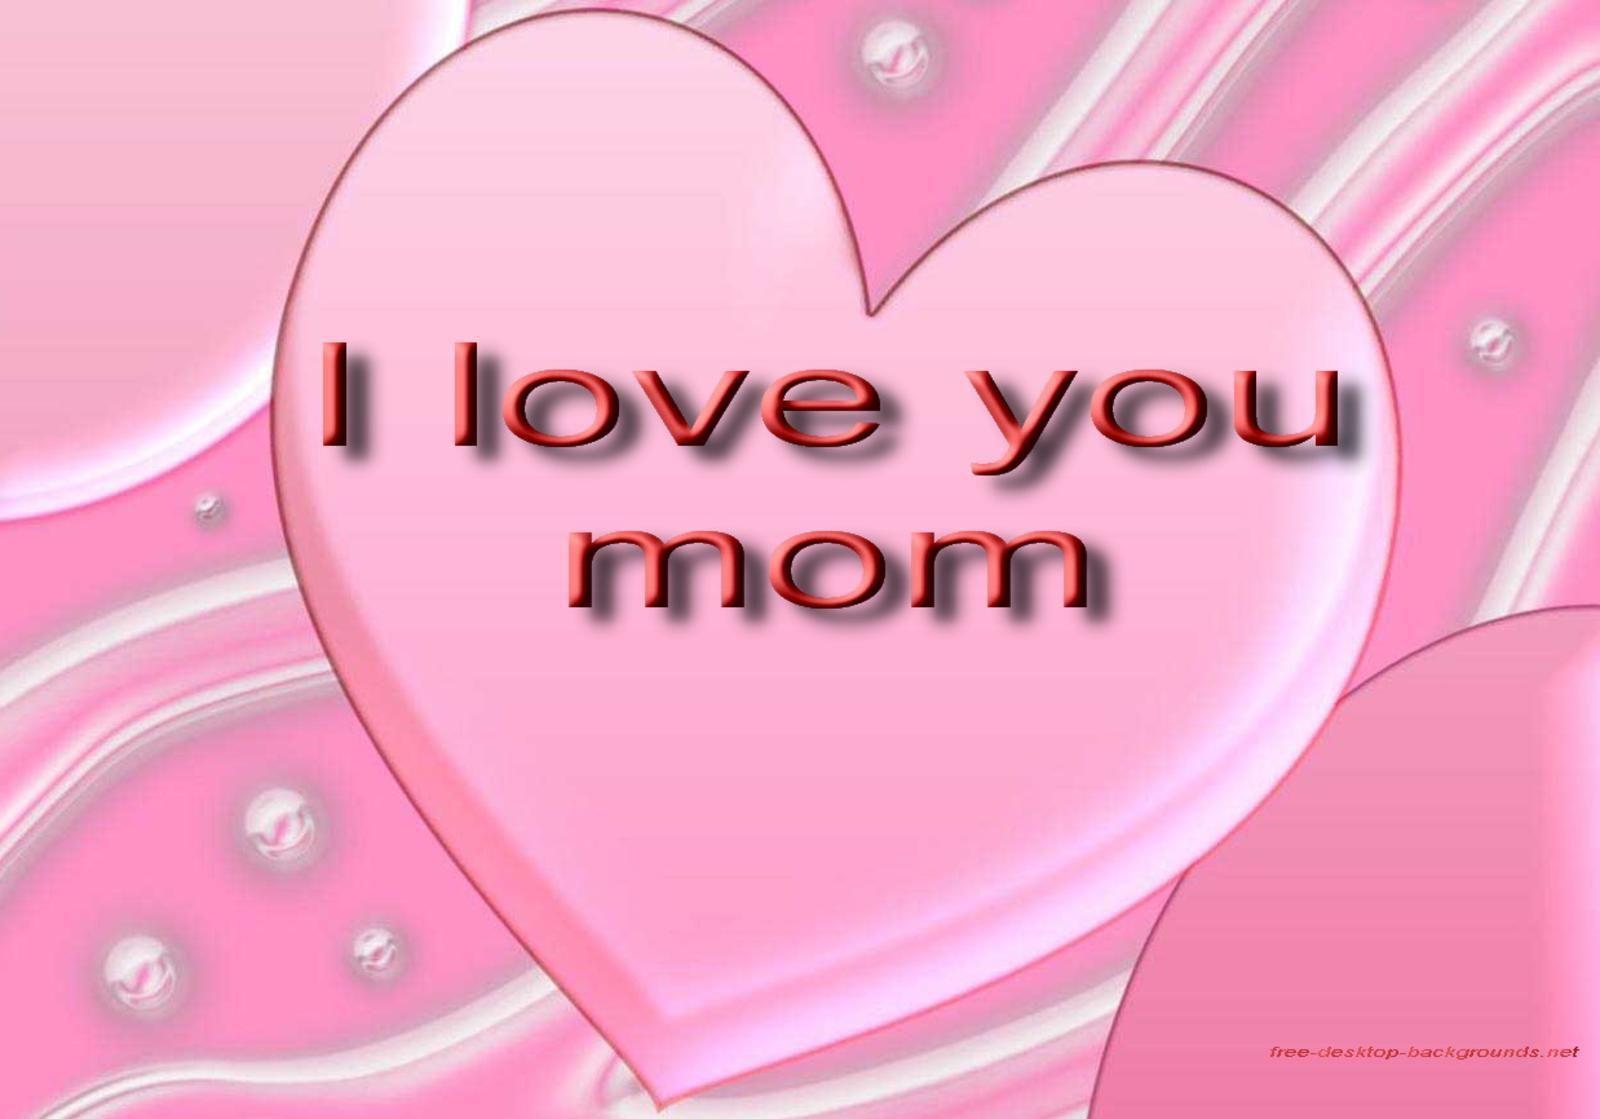 I love my mom and dad wallpaper download (30 Wallpaper)